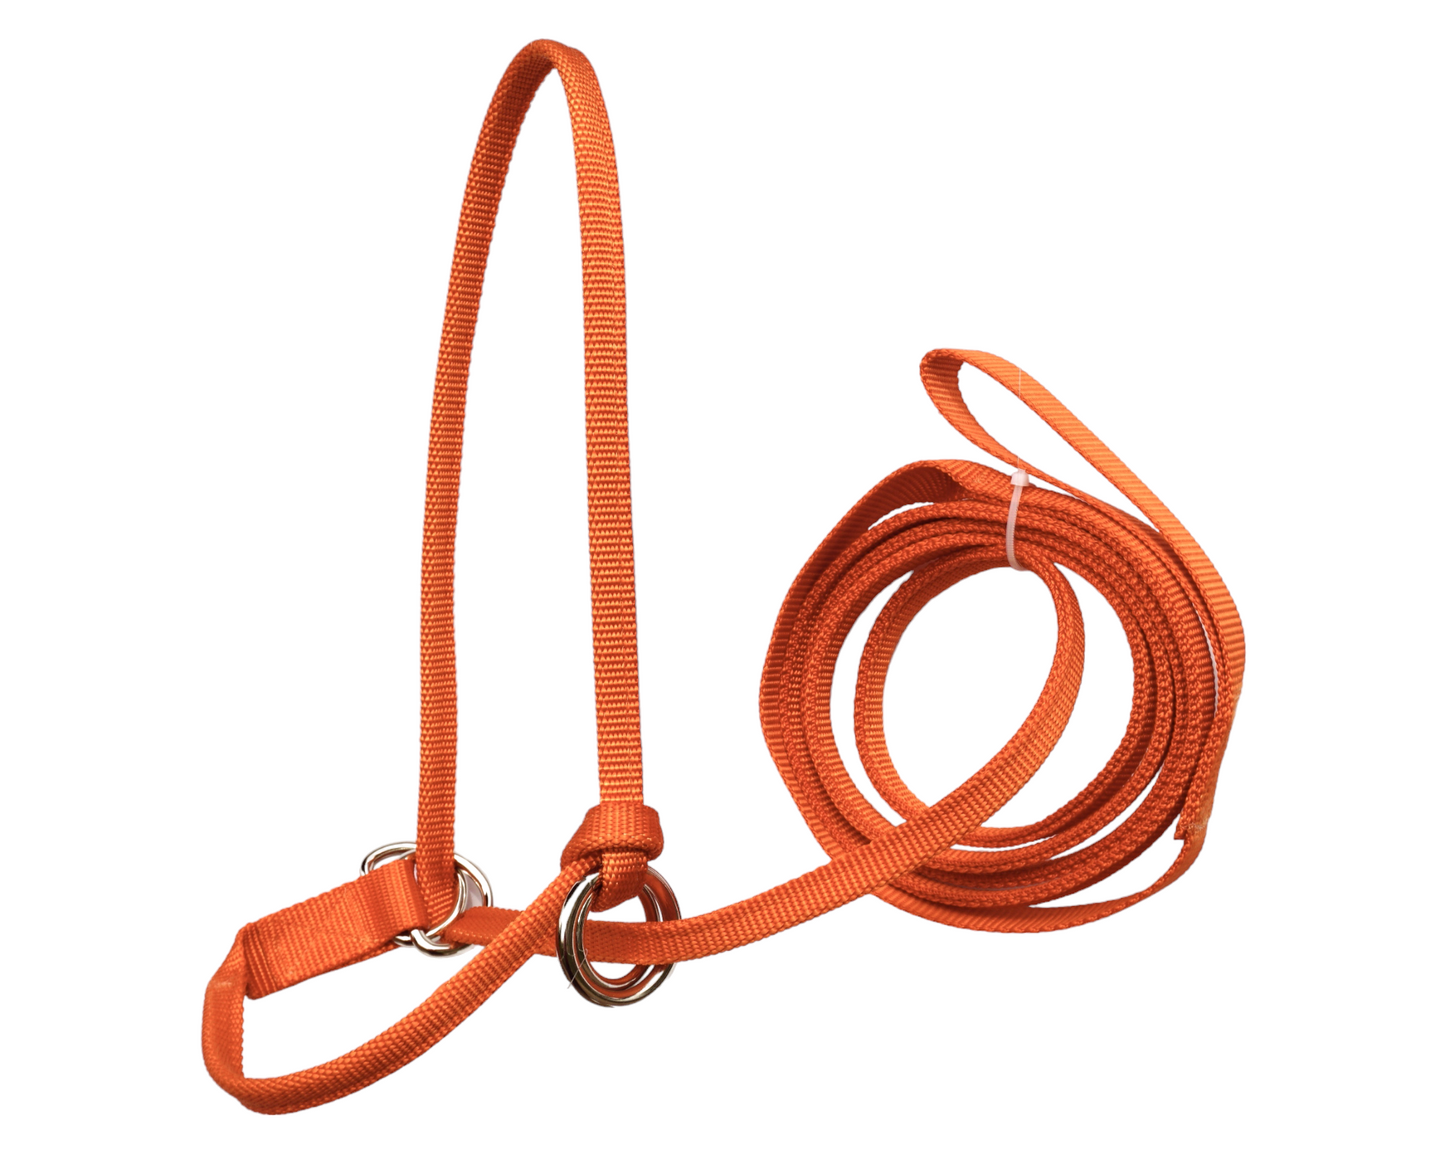 Mule & Donkey Halter All, Large, Solid Colors